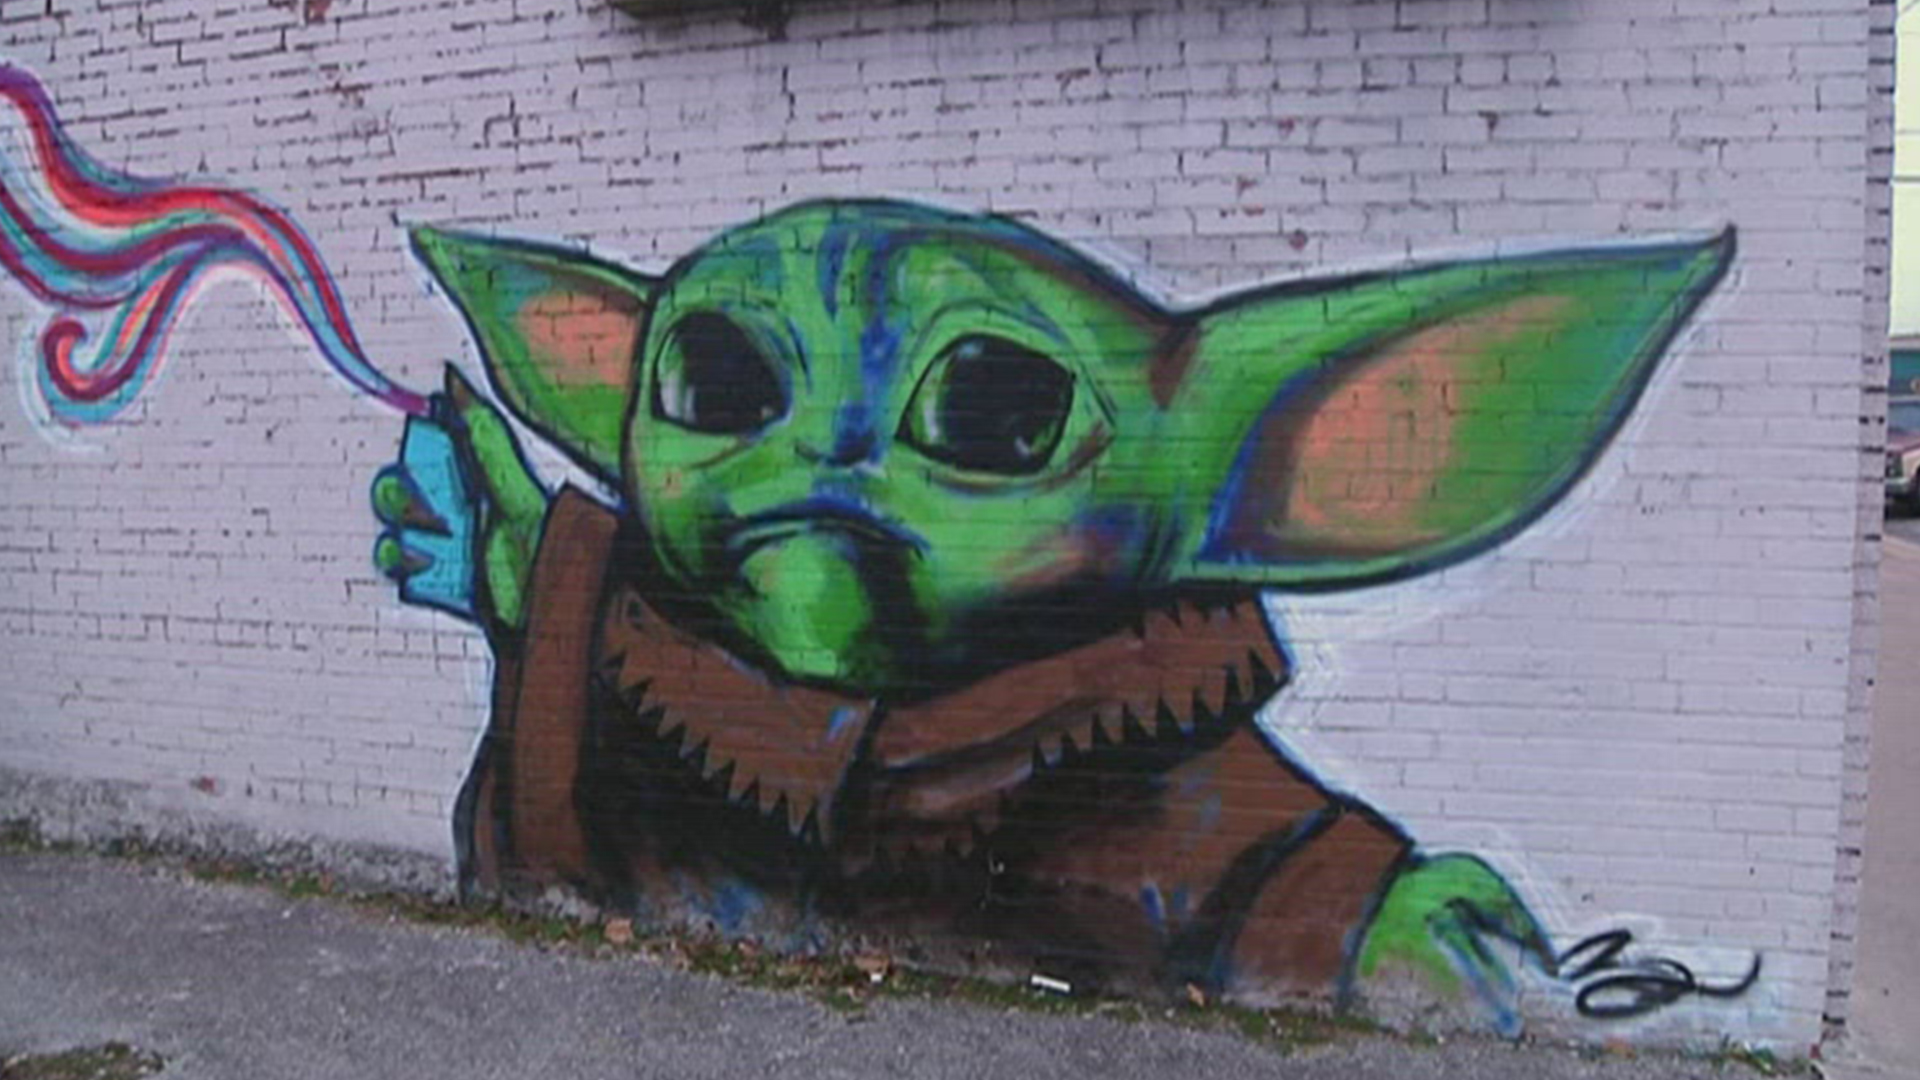 Man says Baby Yoda mural is way to promote arts for young